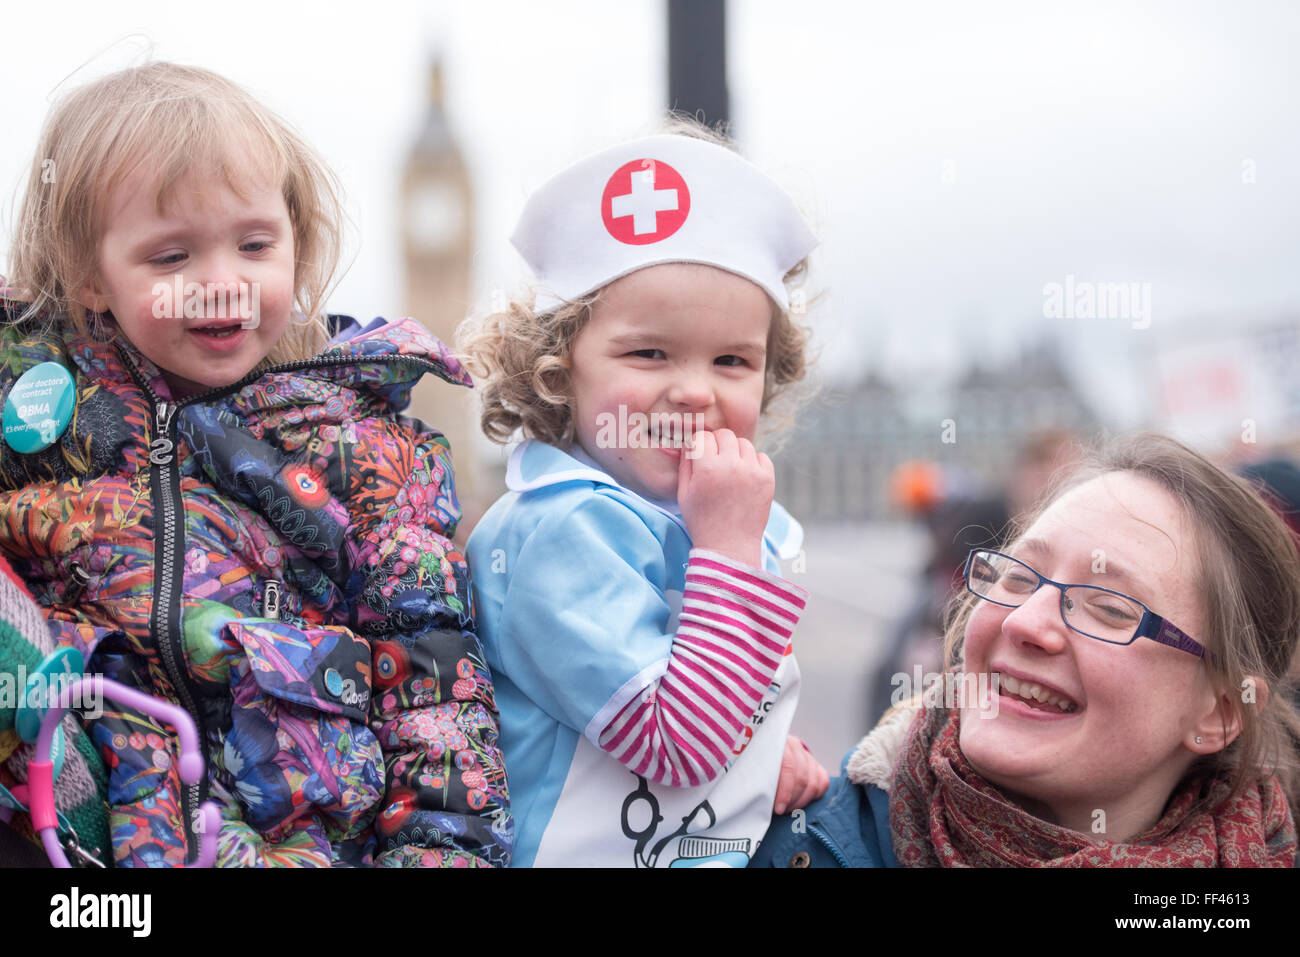 London, UK. 10th February, 2016. Children support Junior doctors on the picket line with banners © Ian Davidson/Alamy Live News Credit:  Ian Davidson/Alamy Live News Stock Photo